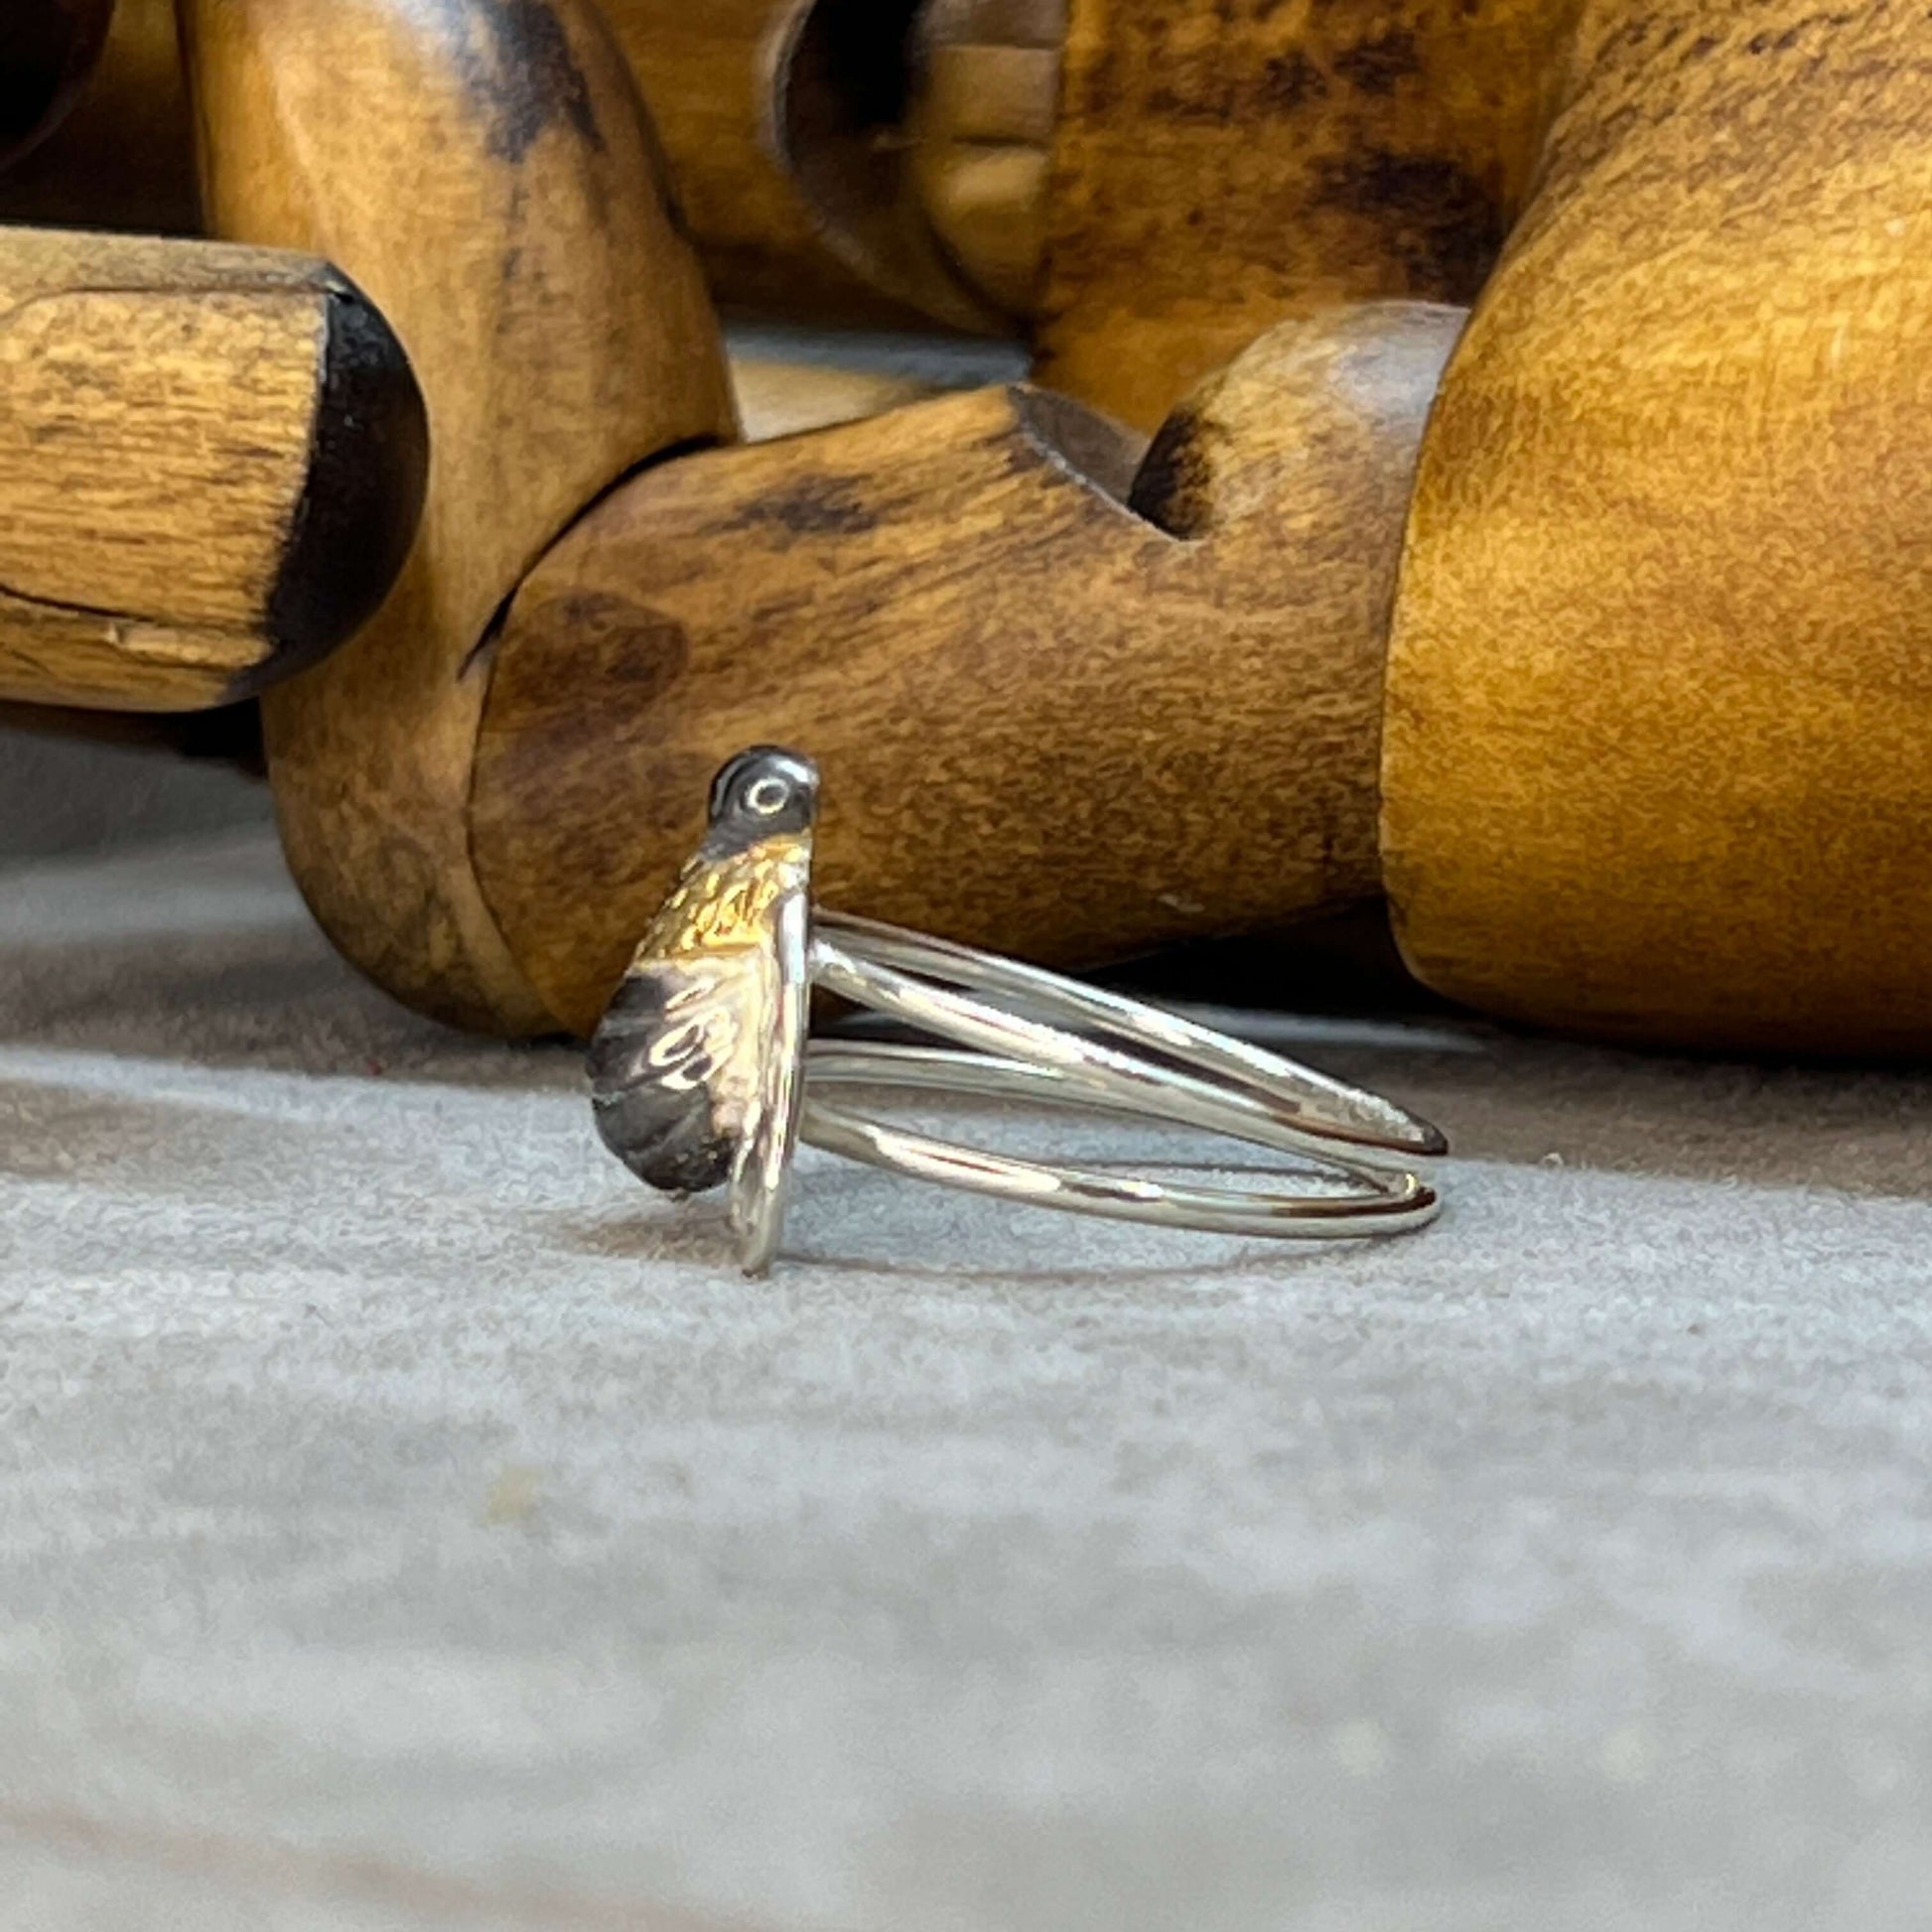 Honeybee Sterling Silver Solitaire Ring By Paula Bolton - Twelve Silver Trees